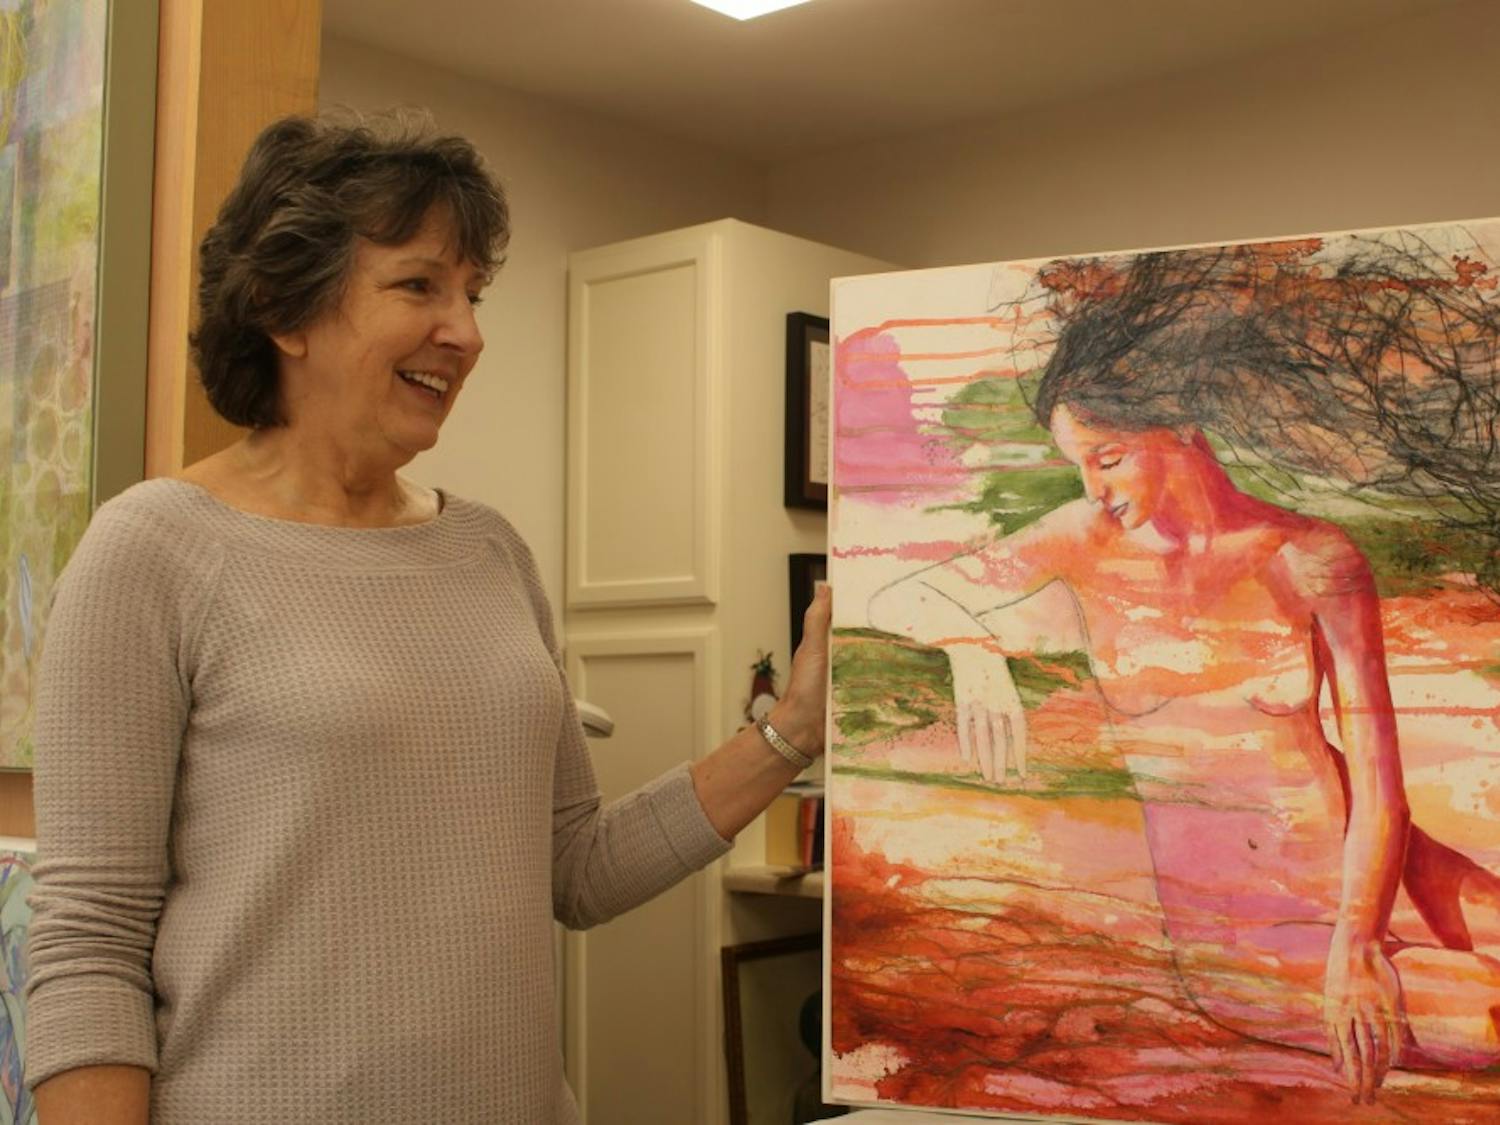 Visual artist Nancy Smith stands by her painting "From the Depths of the Earth" in her home studio on Saturday, March 2, 2019. Nancy's paintings, which were created using acrylic and mixed media, are being hosted by the FRANK gallery.&nbsp;